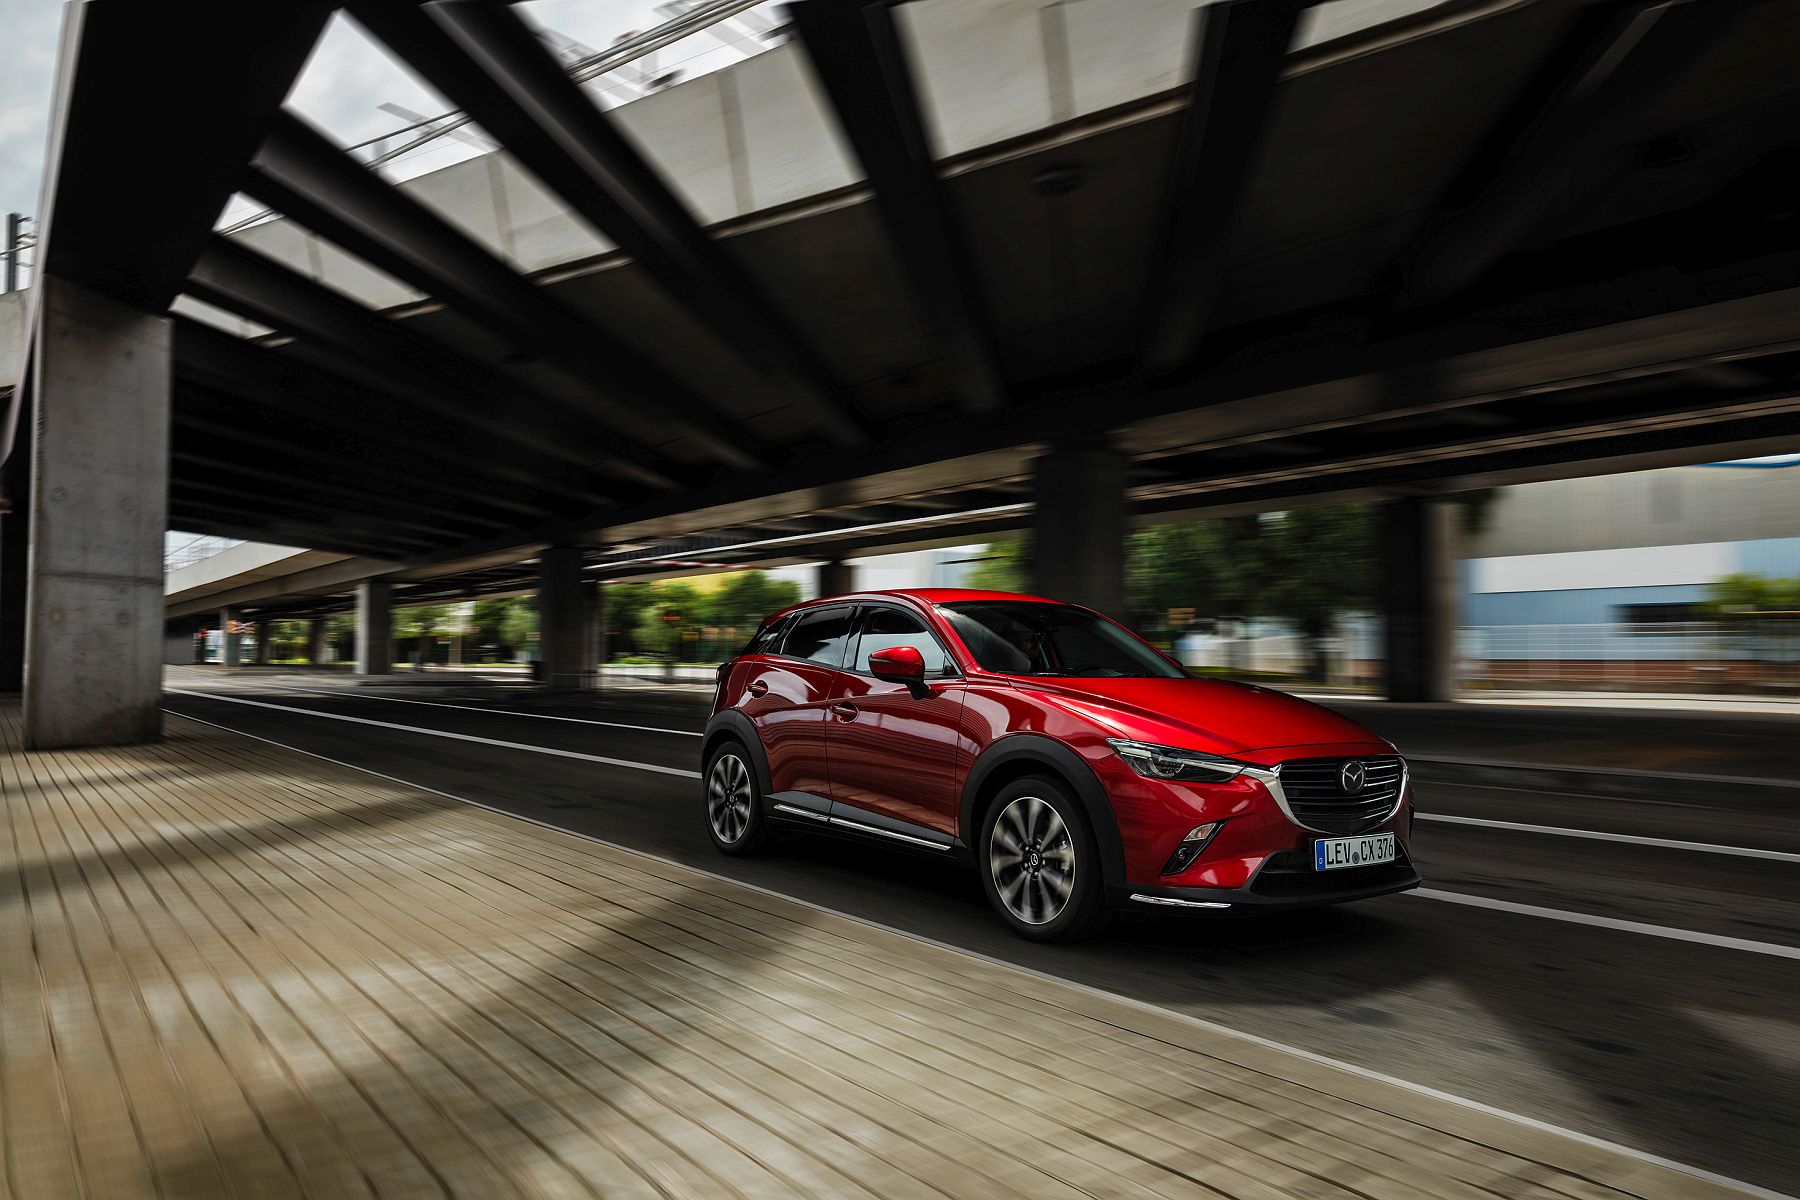 07_2018_MAZDA_CX-3_ACTION_FRONT